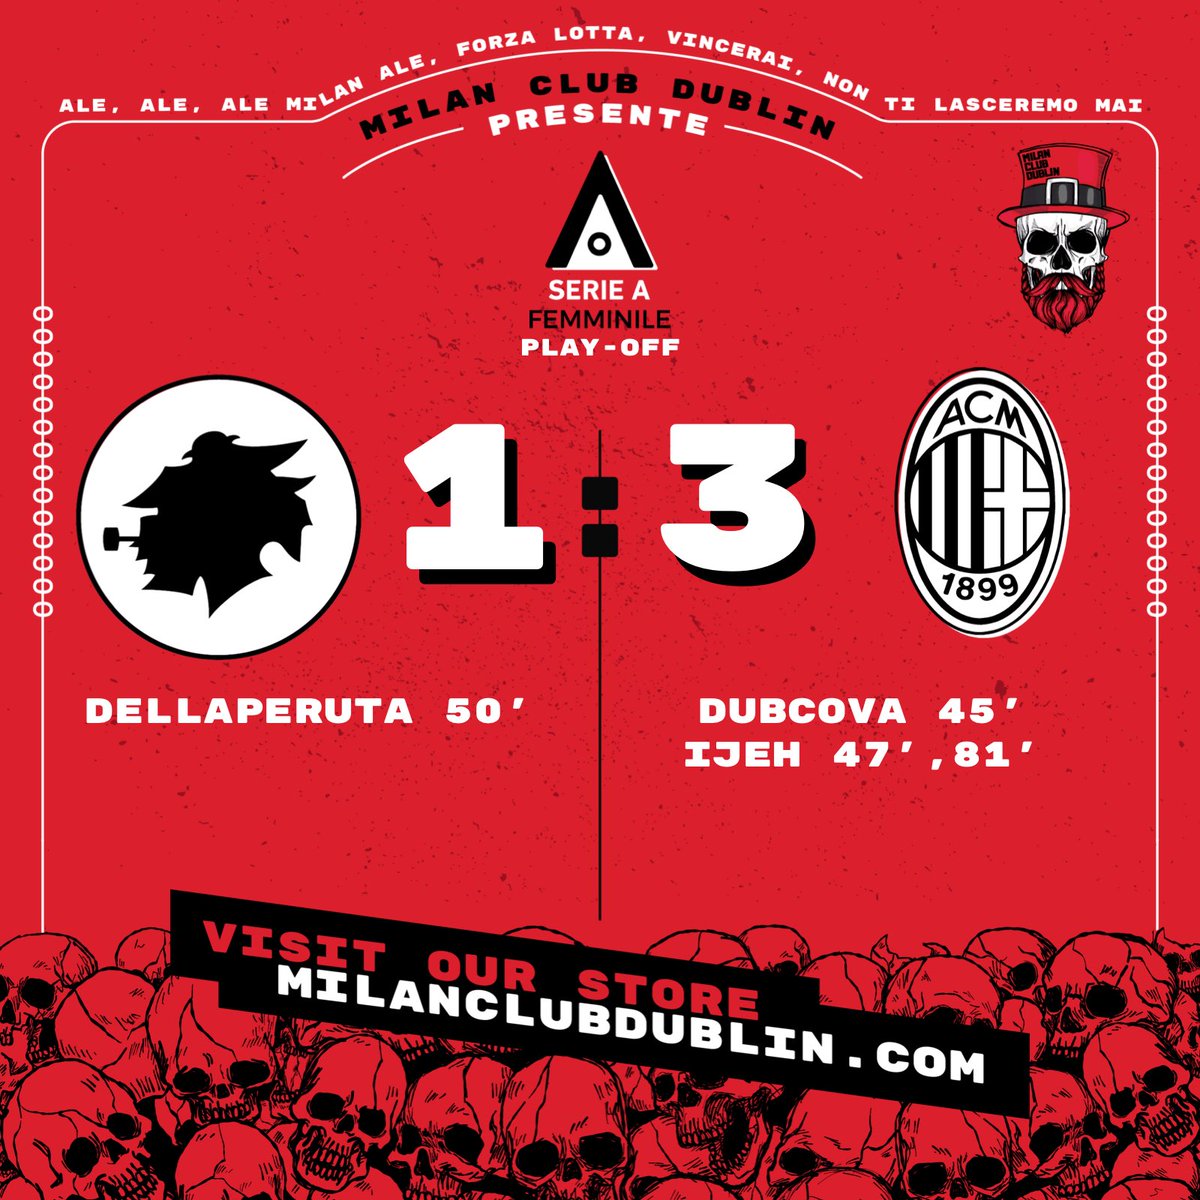 Another successful win for the Rossonere #followtherossonere #SempreMilan